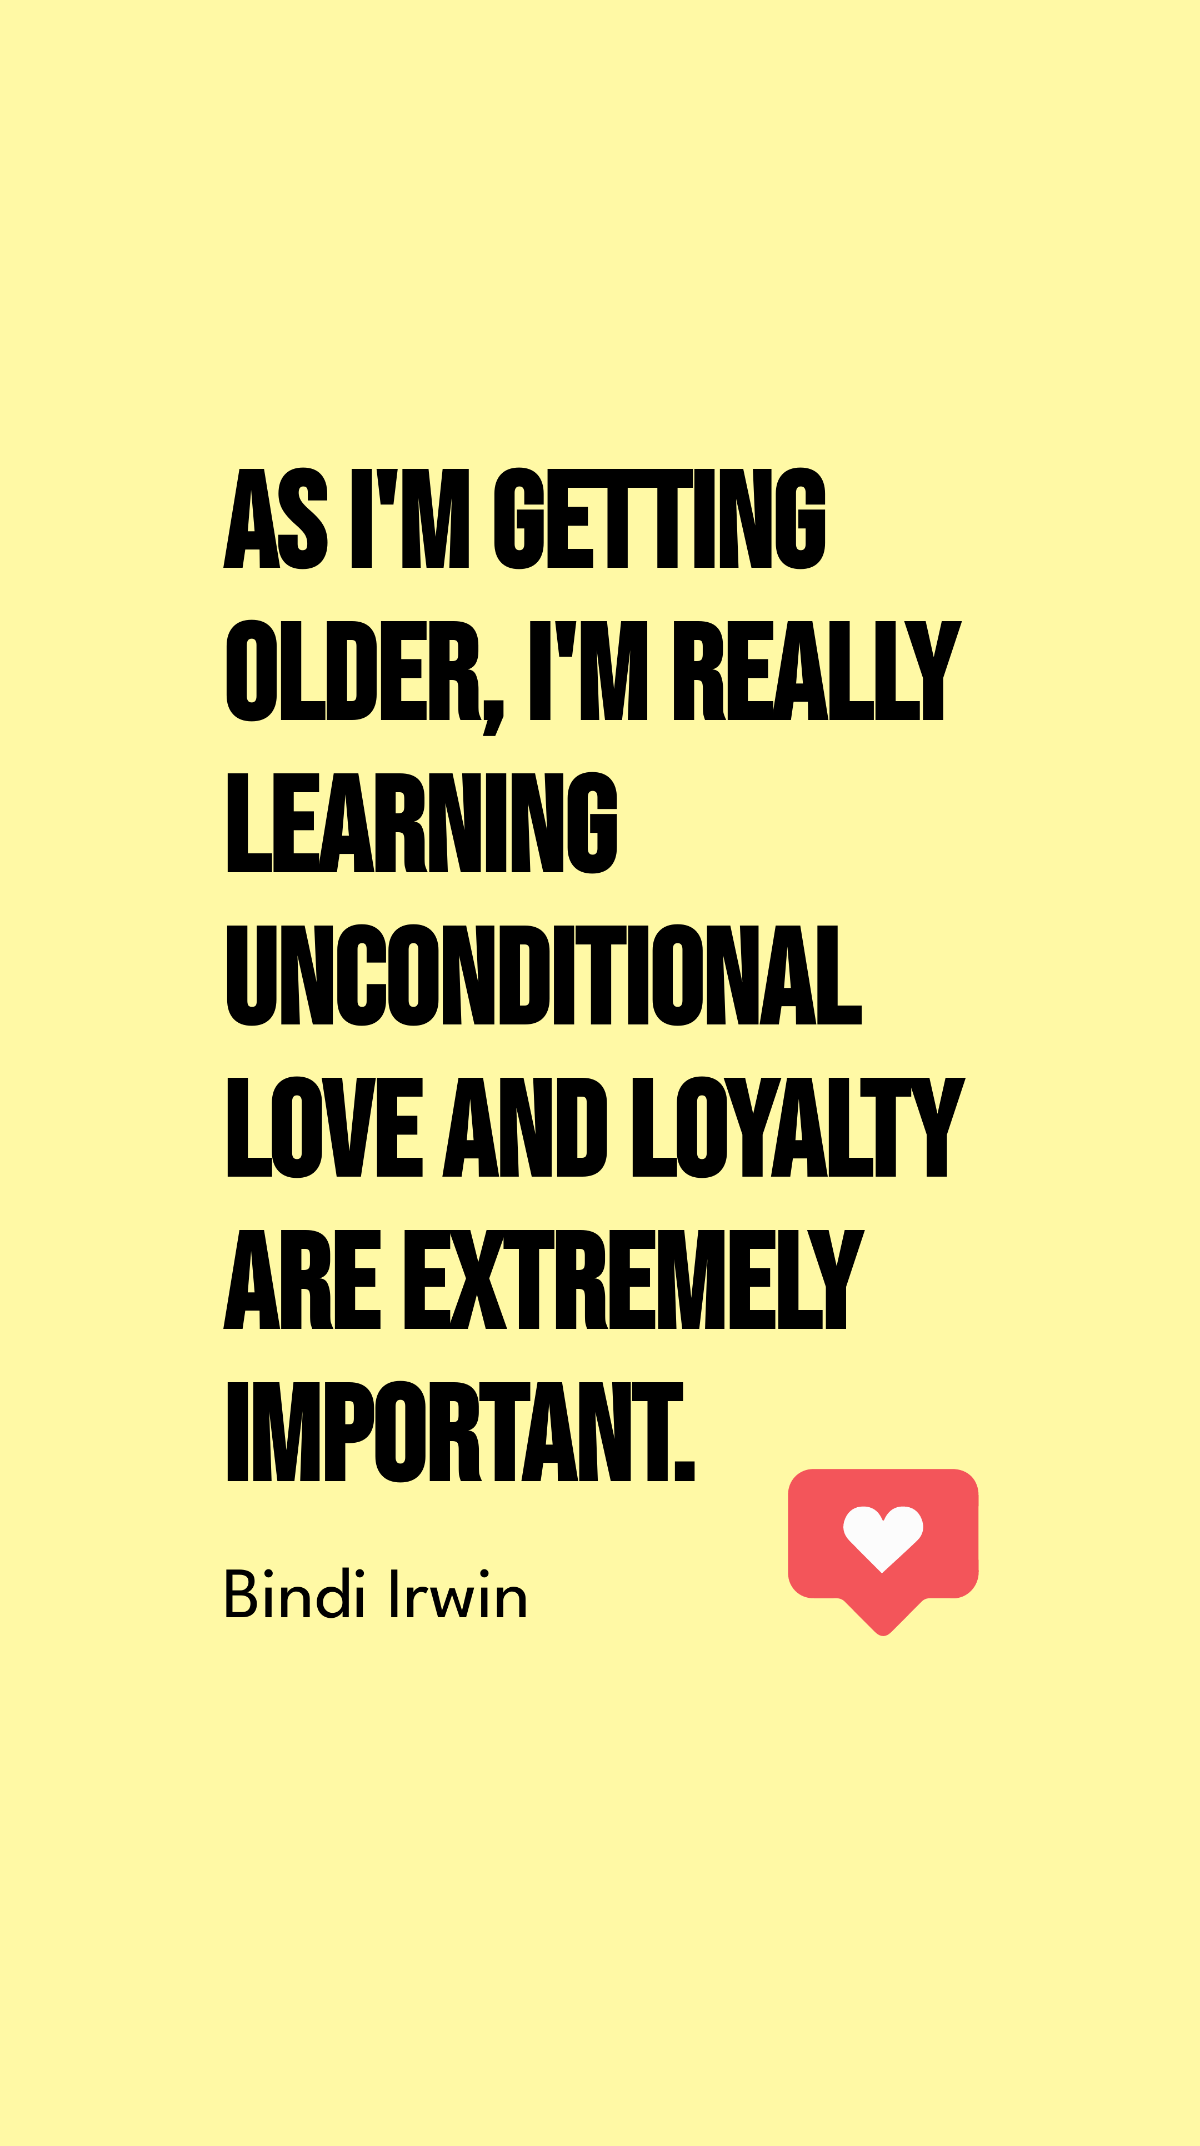 Bindi Irwin- As I'm getting older, I'm really learning unconditional love and loyalty are extremely important. Template